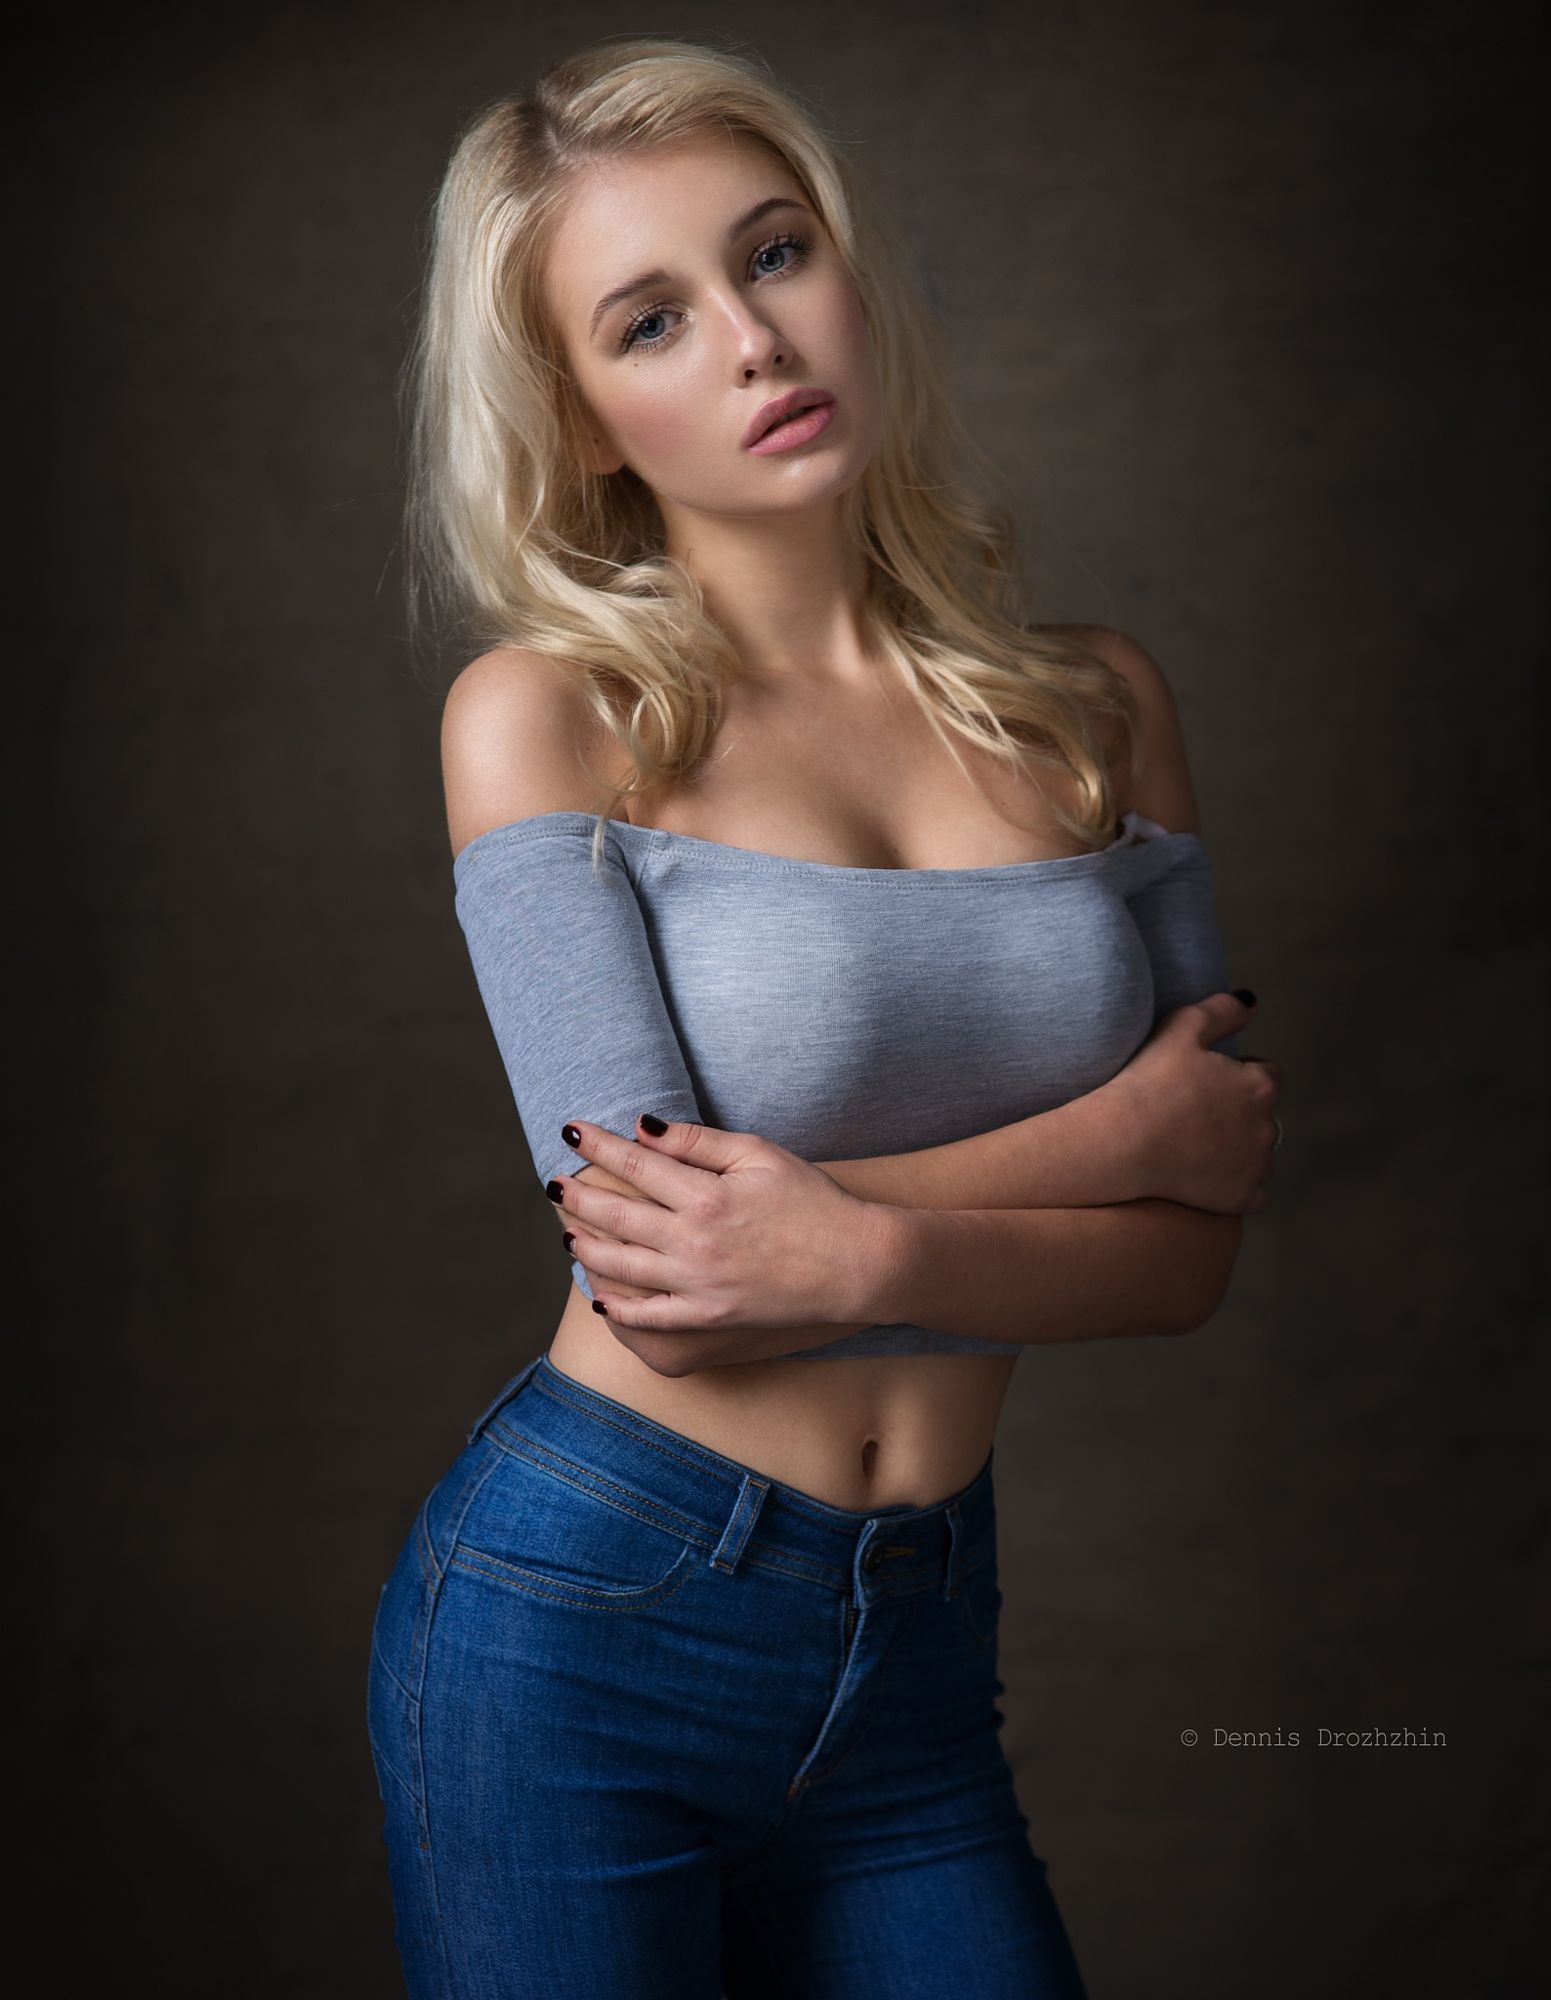 People 1551x2000 Dennis Drozhzhin women blonde long hair straight hair blue eyes looking at viewer juicy lips lipstick blushing blouses bare shoulders grey clothing jeans denim painted nails black nails jewelry rings simple background grey tops watermarked makeup bare midriff arms crossed model studio